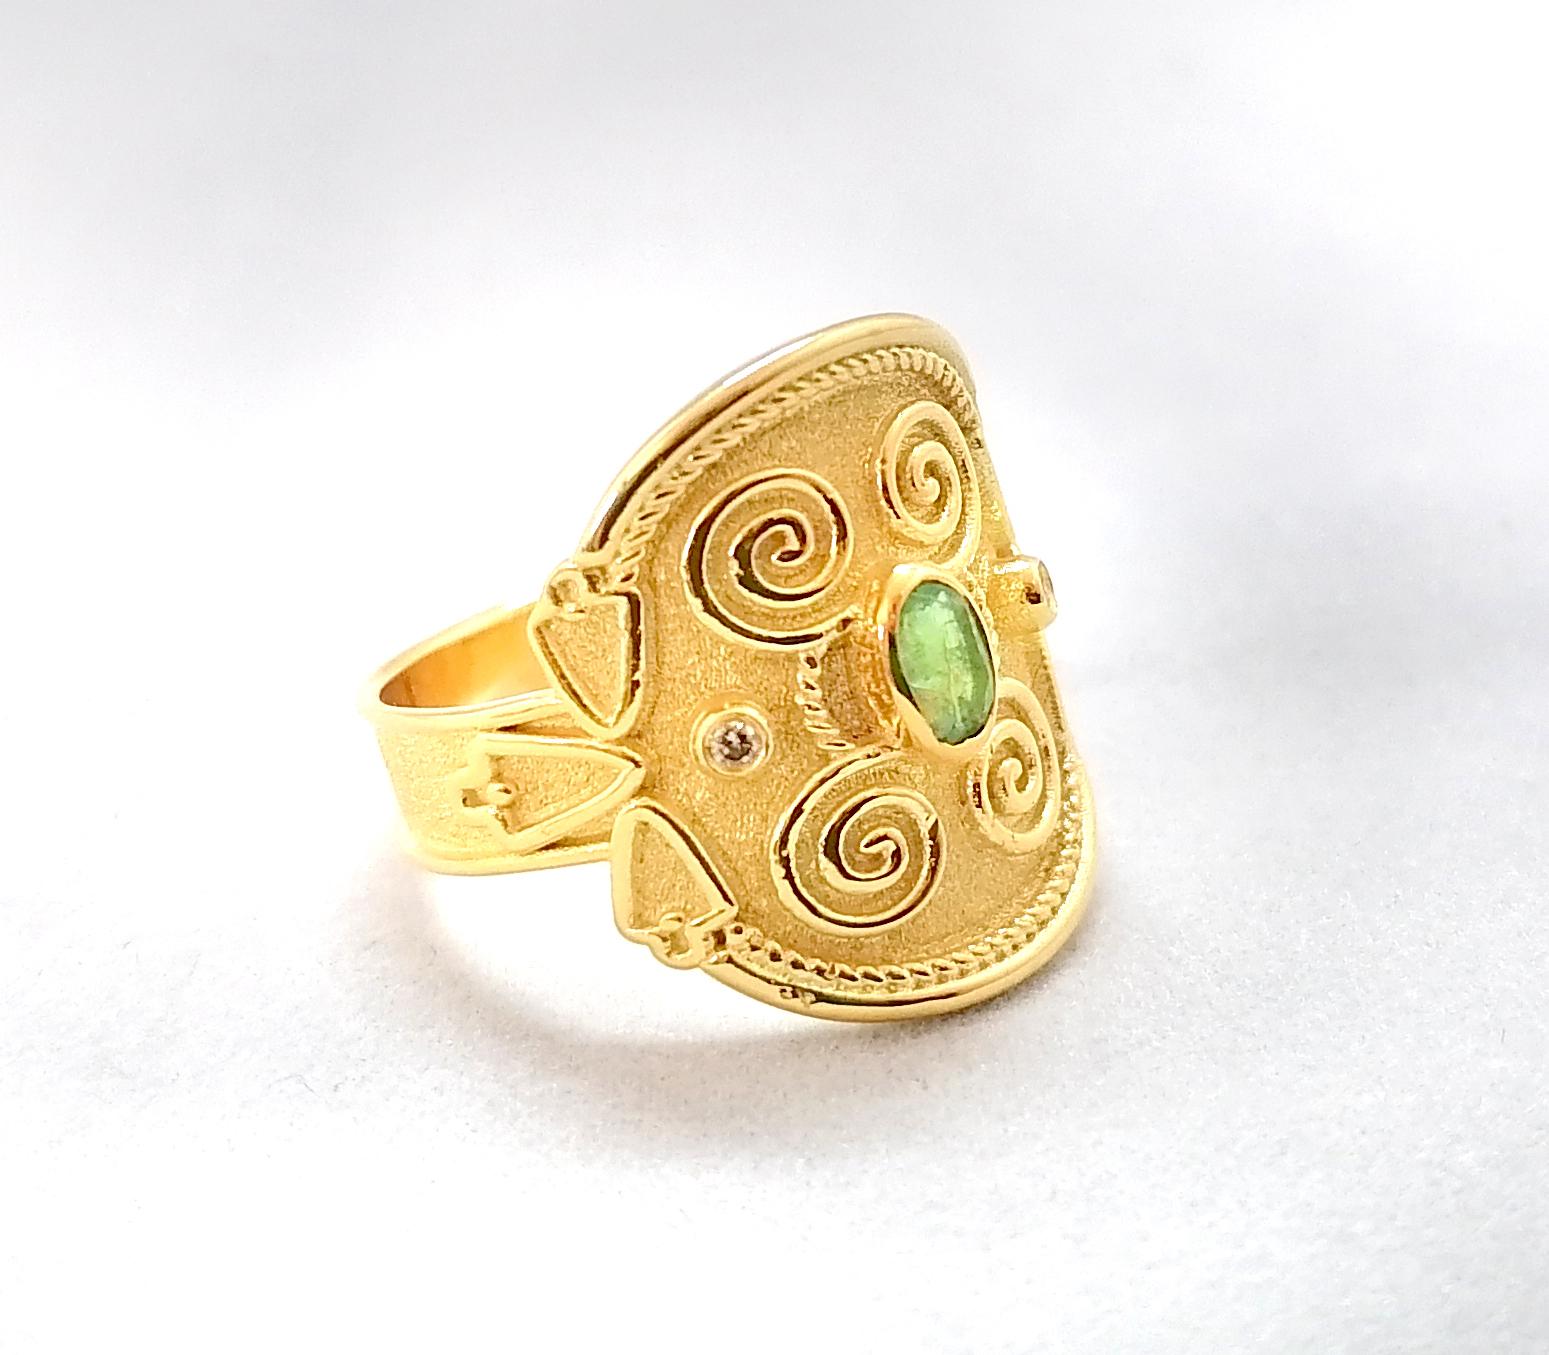 This S.Georgios unique designer Band Ring is 18 Karat Yellow Gold and all handmade with Byzantine bead granulation and a unique velvet background finished. This gorgeous band ring features an Oval cut natural Emerald total weight of 0.26 Carat,